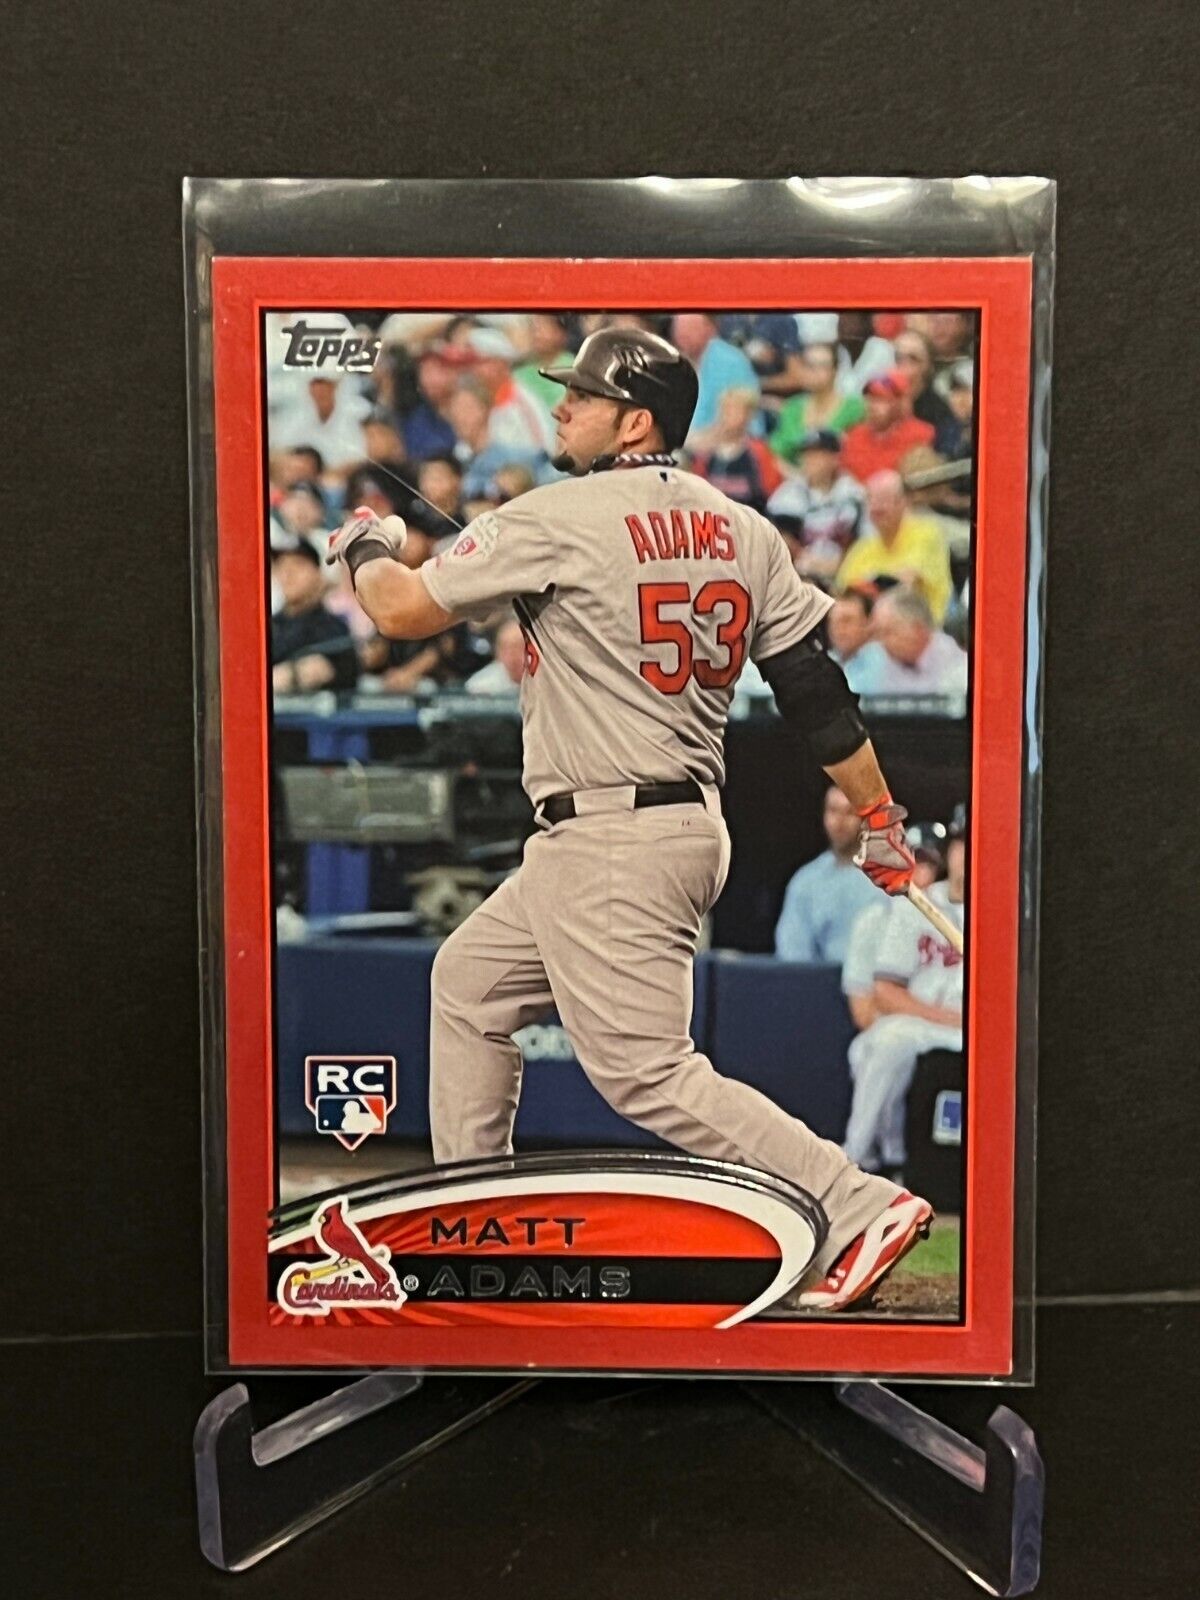 2013 Topps Baseball Matt Adams Red Border Rookie RC Card #US179. rookie card picture